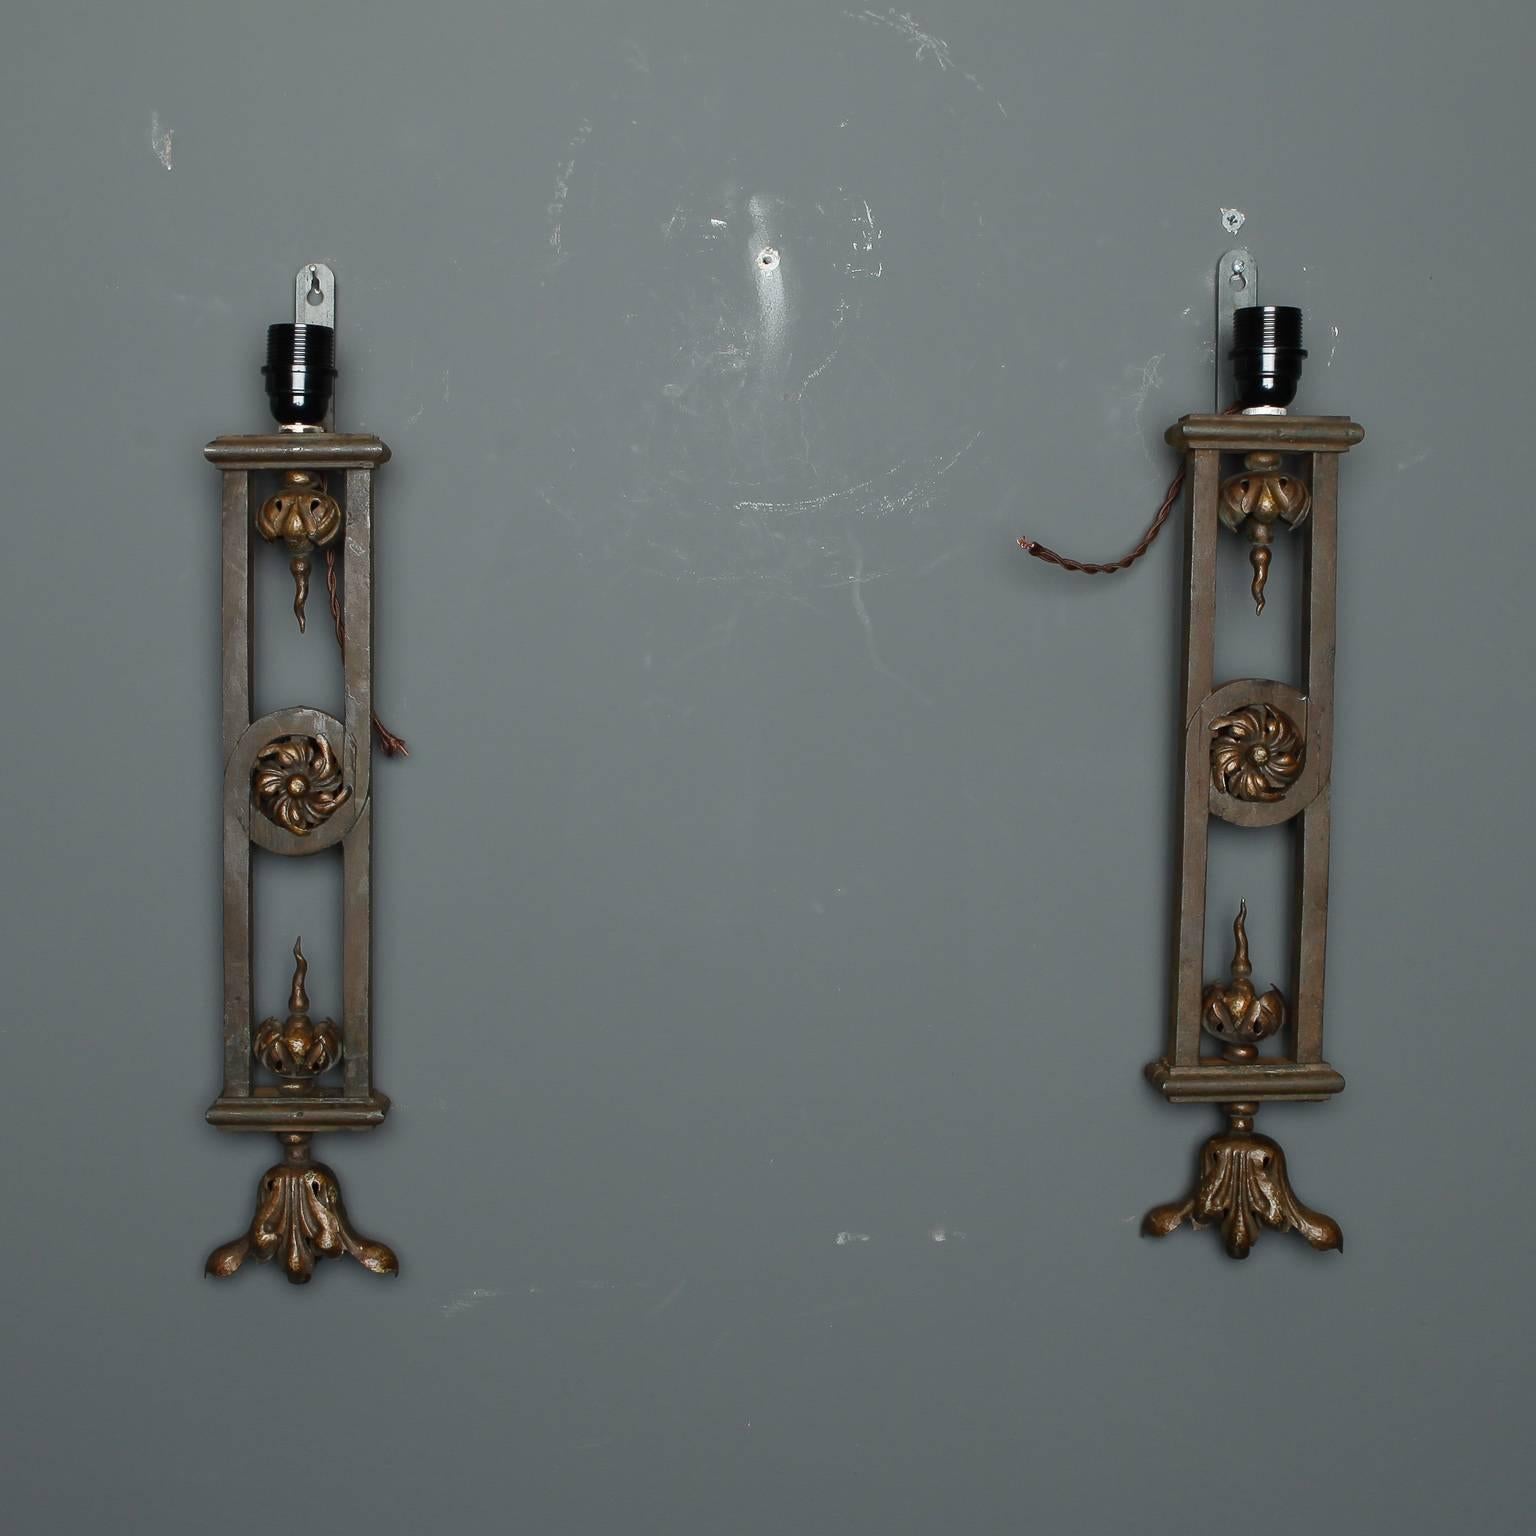 Pair of Tall Iron Sconces Made from Antique Balustrades 3